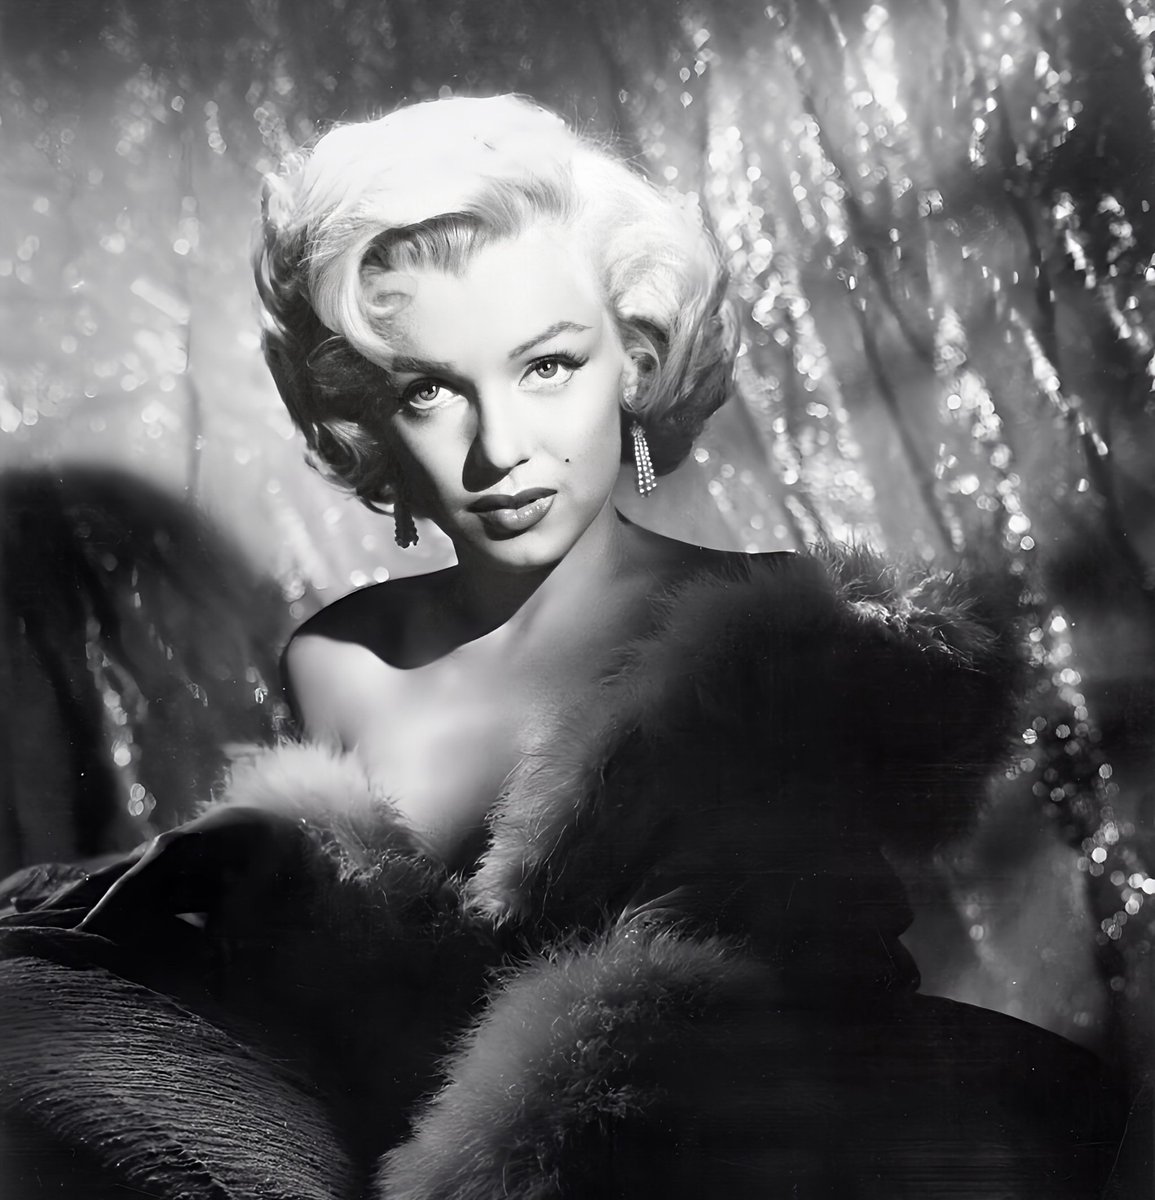 Marilyn Monroe photographed by Frank Powolny in the “White Fur” sitting (1953).